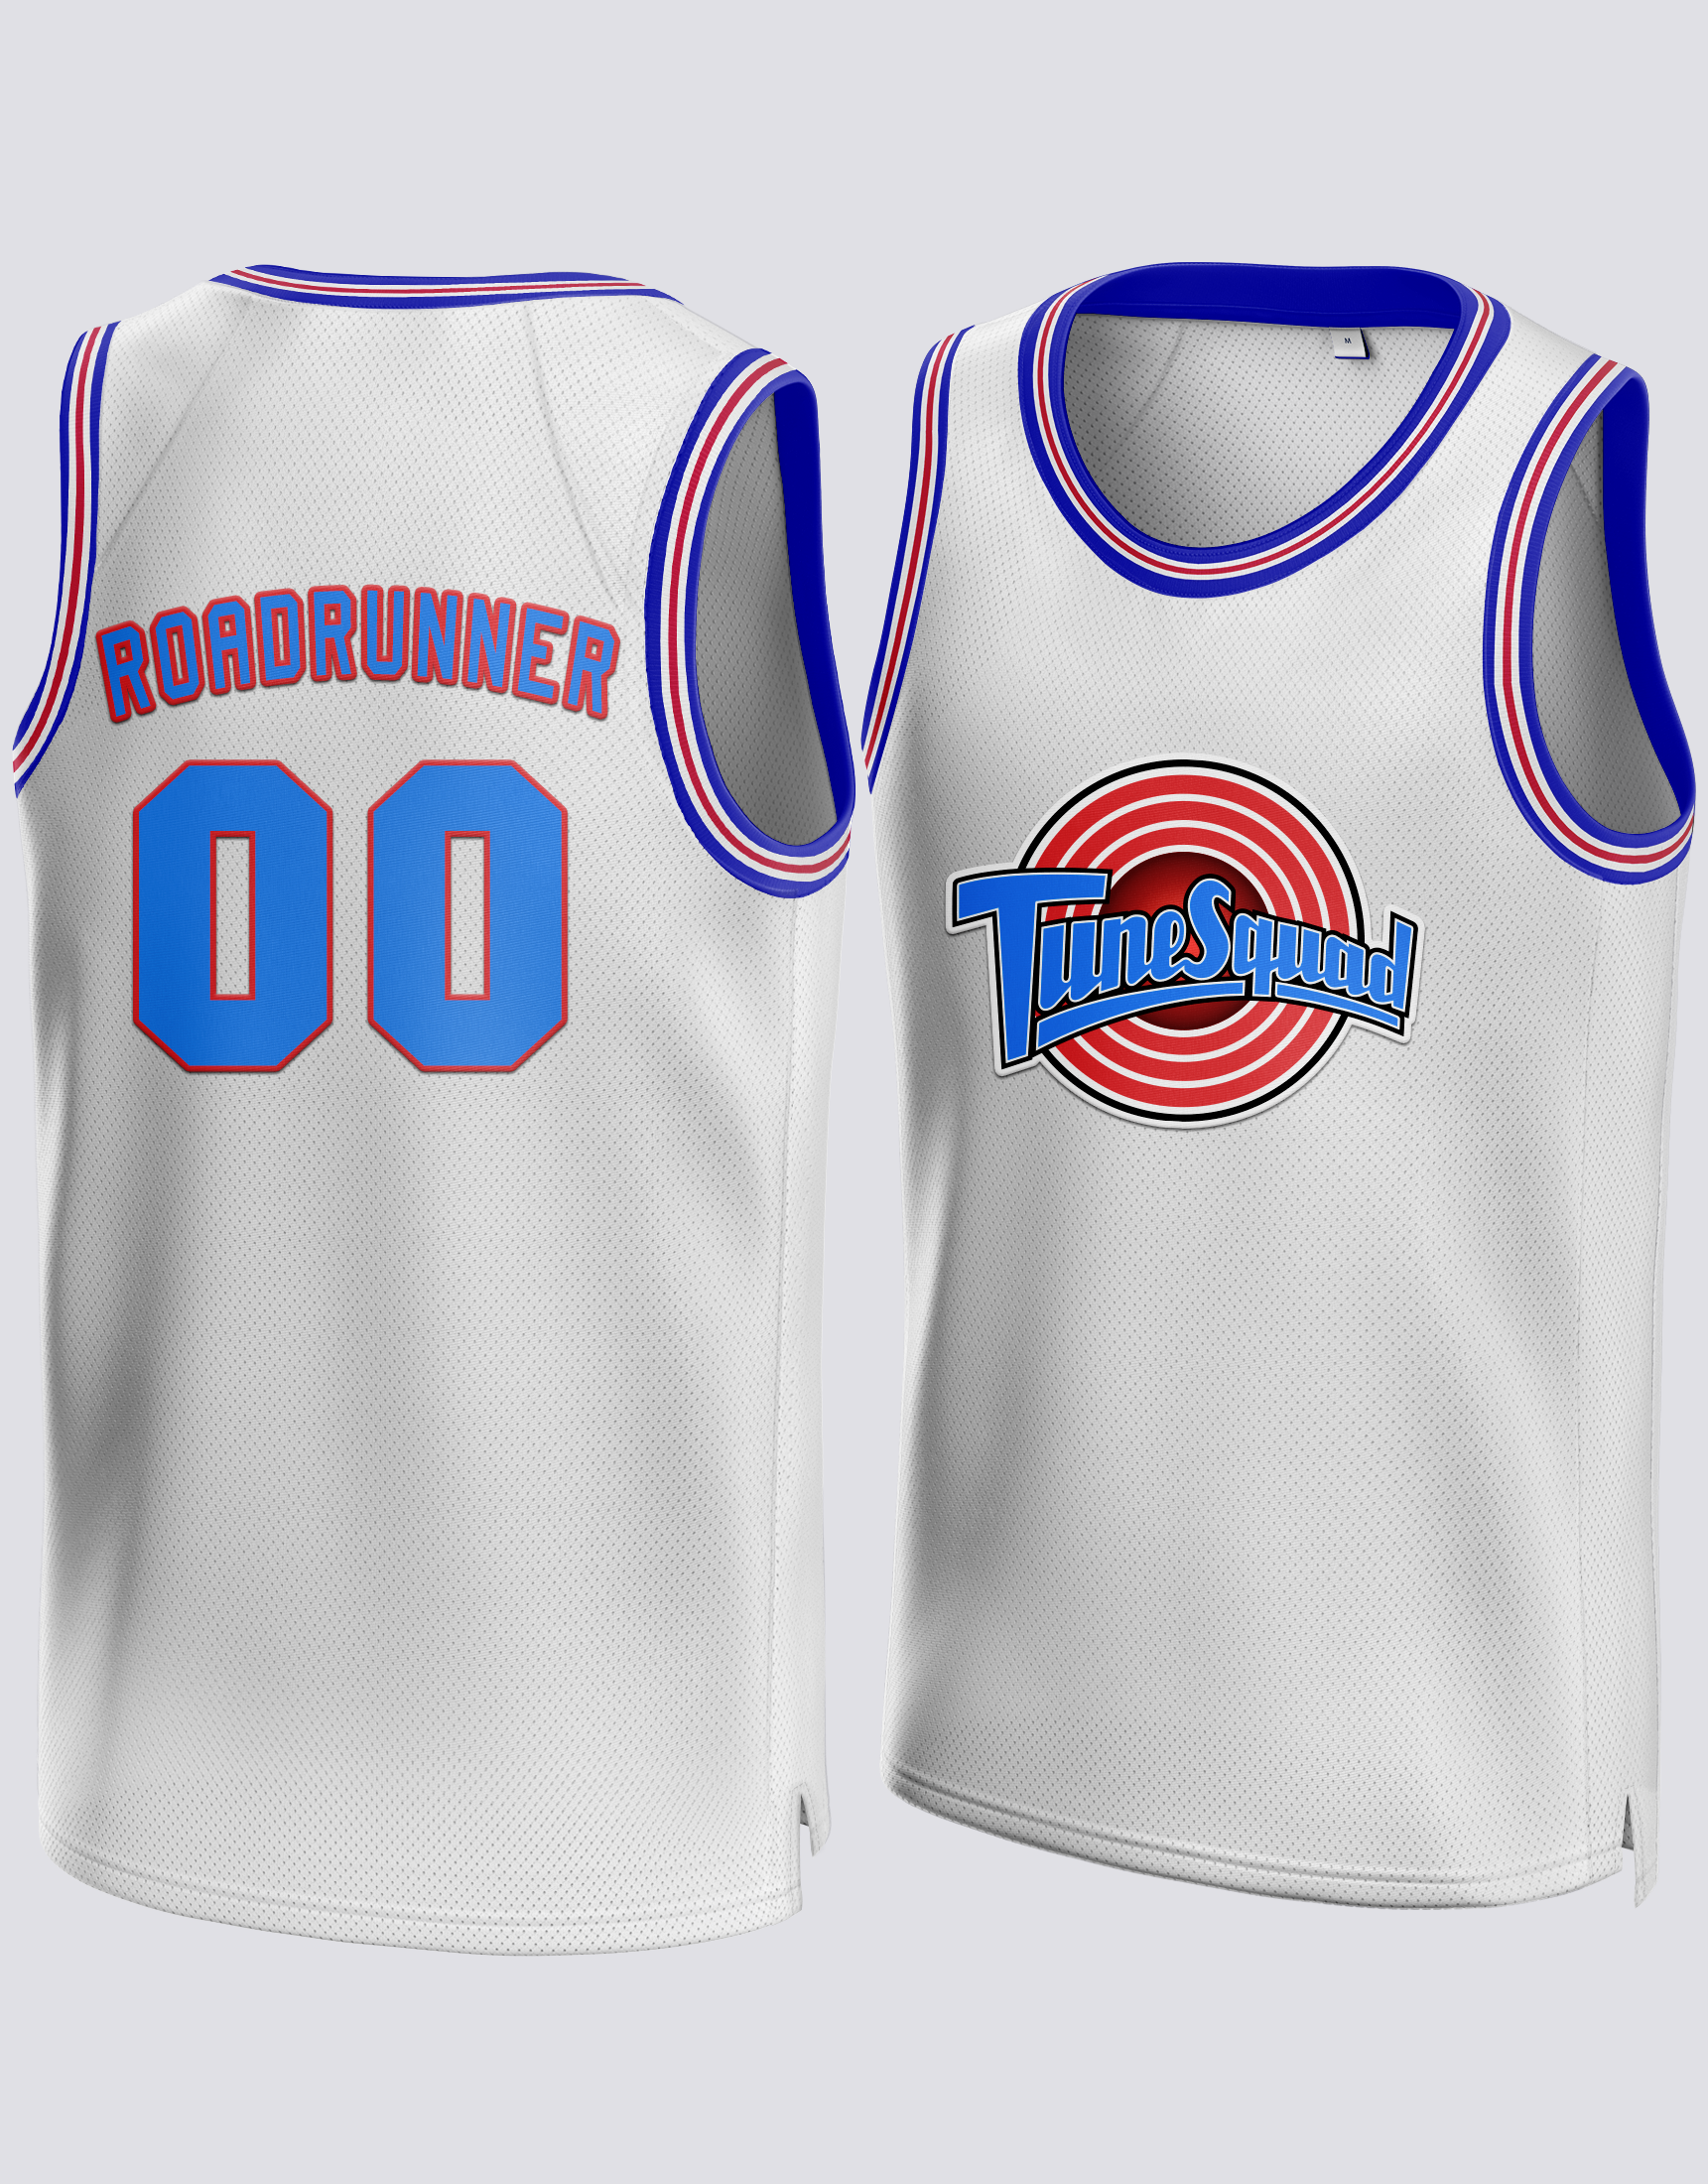 Space Jam Tunesquad Basketball Team Jersey - CosplayFTW